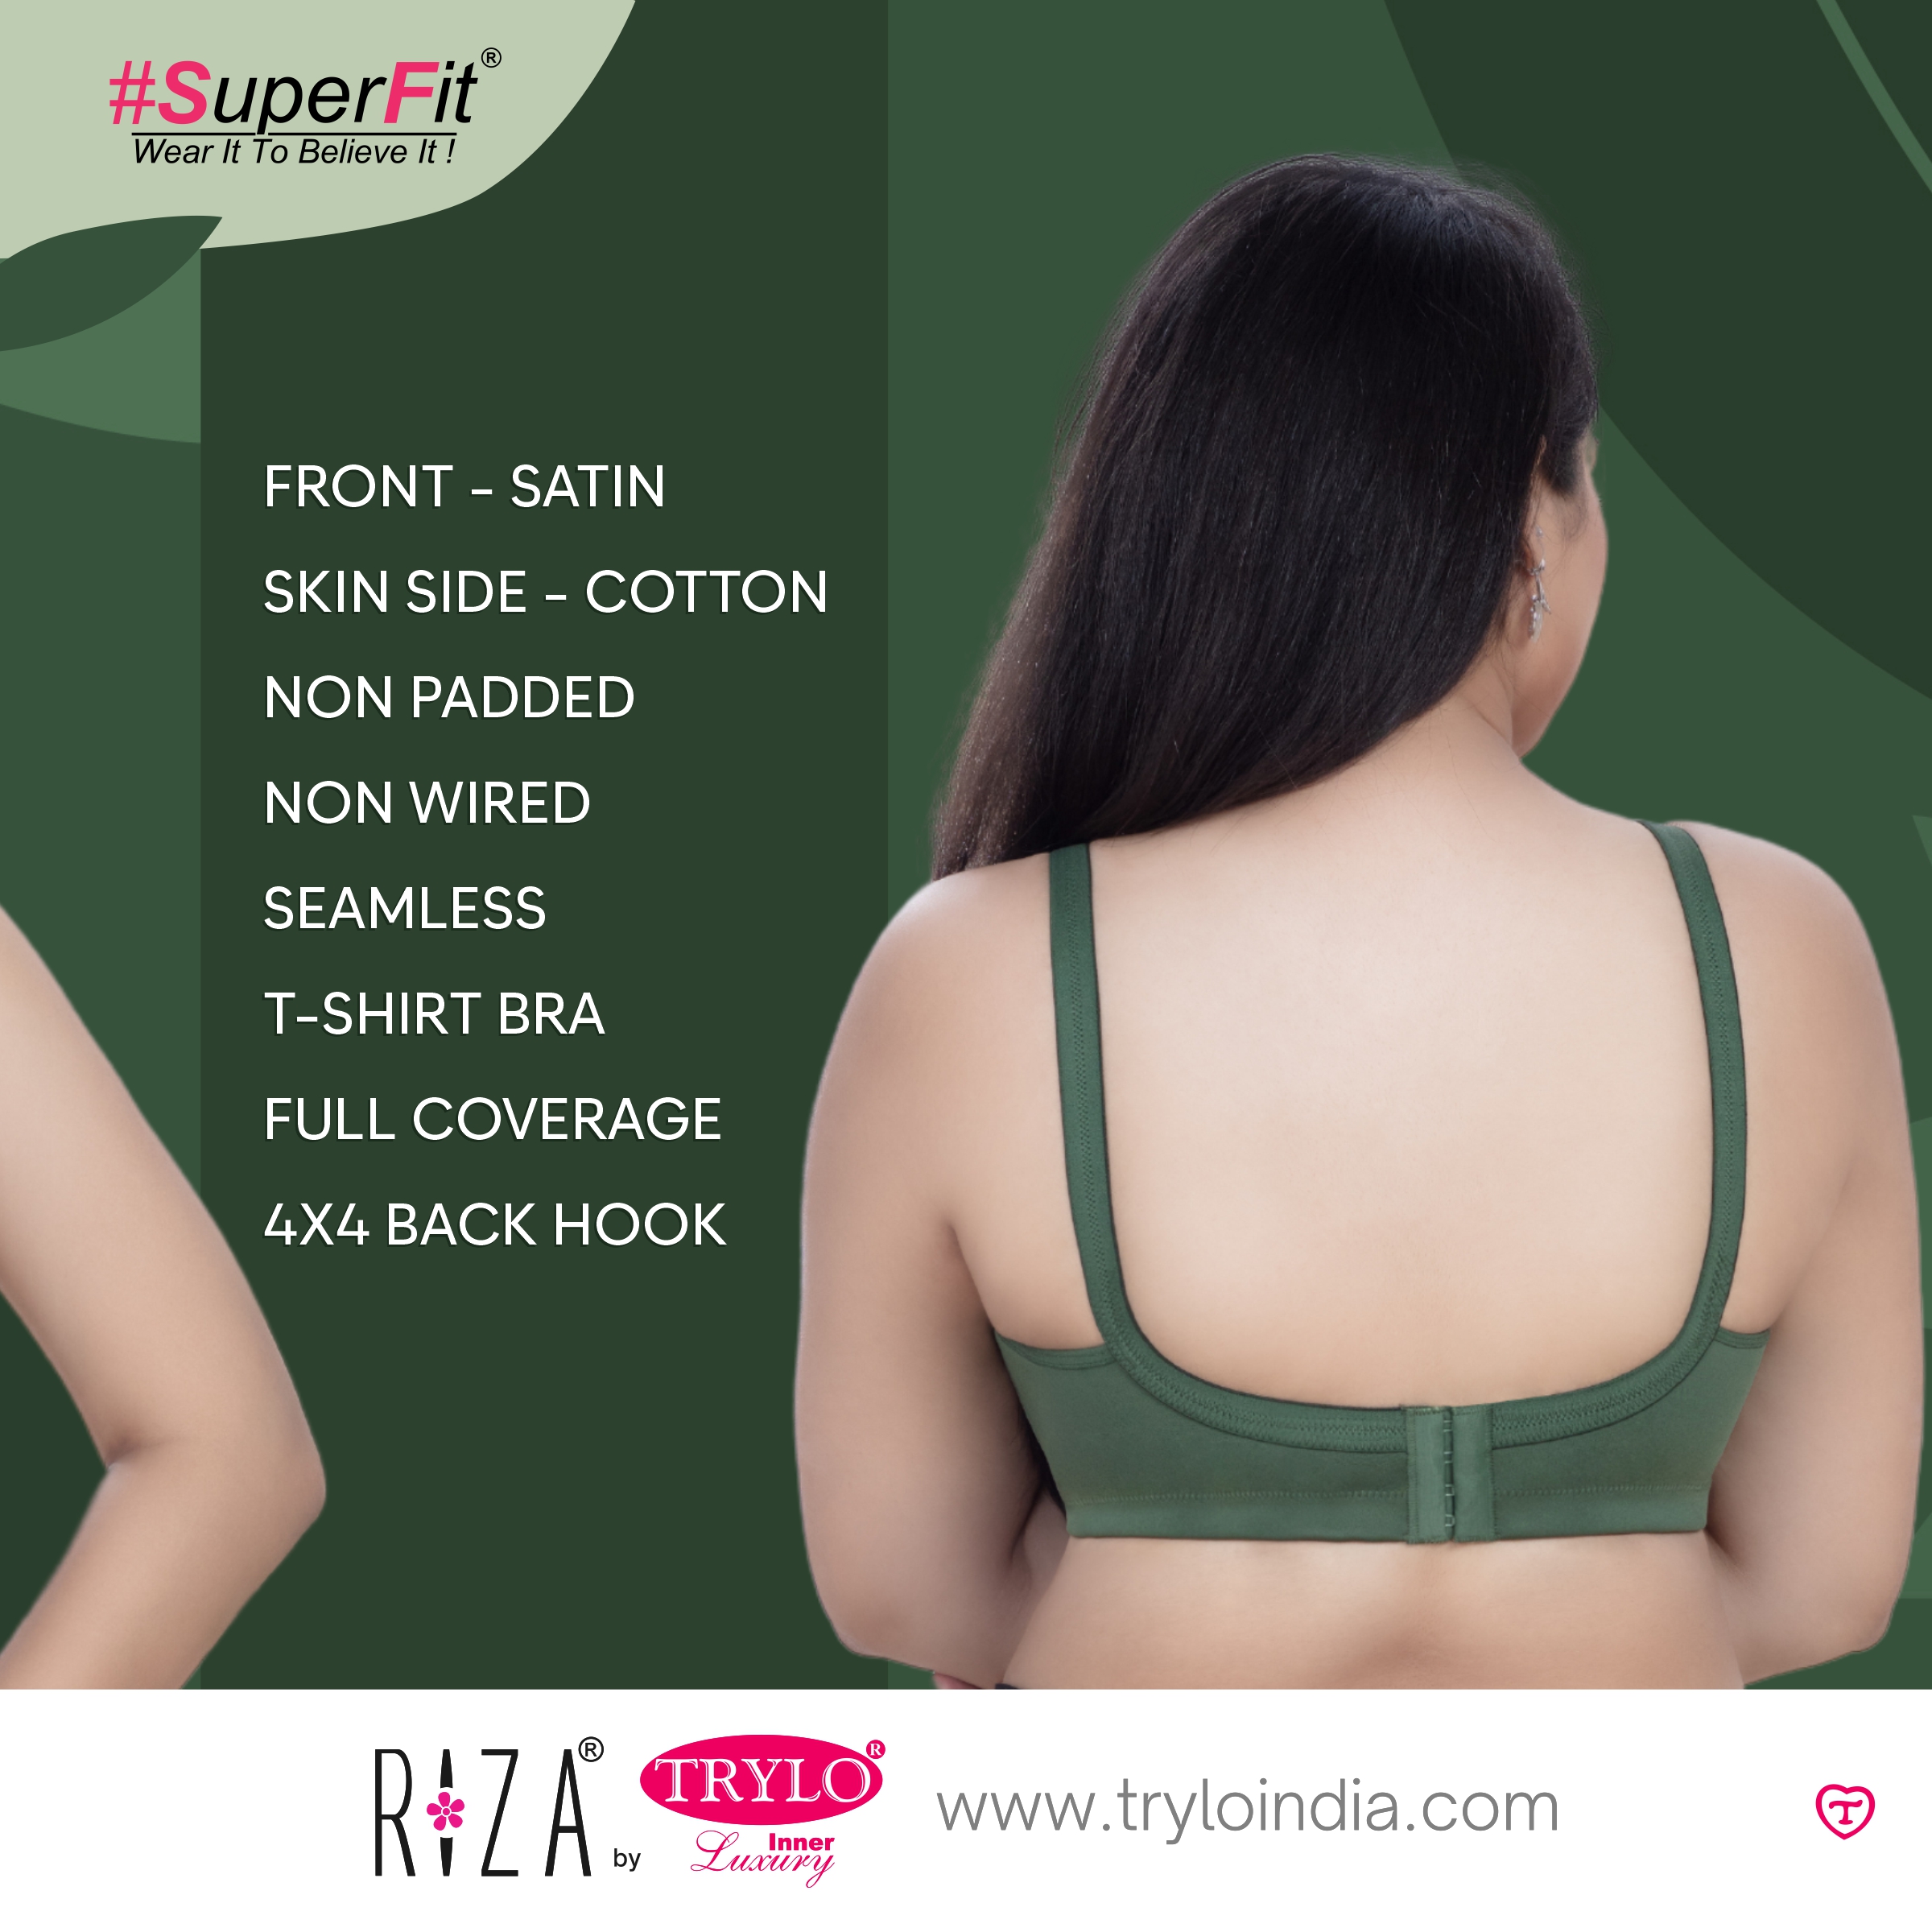 Trylo Intimates on X: With a unique fabric combination of satin outside  and cotton inside, it offers luxury & comfort. Product shown - Riza  Superfit #TryloIndia #TryloIntimates #RizaIntimates #RizabyTrylo  #Seamlessbra #LuxuryComfortSupport #RizaSuperfit